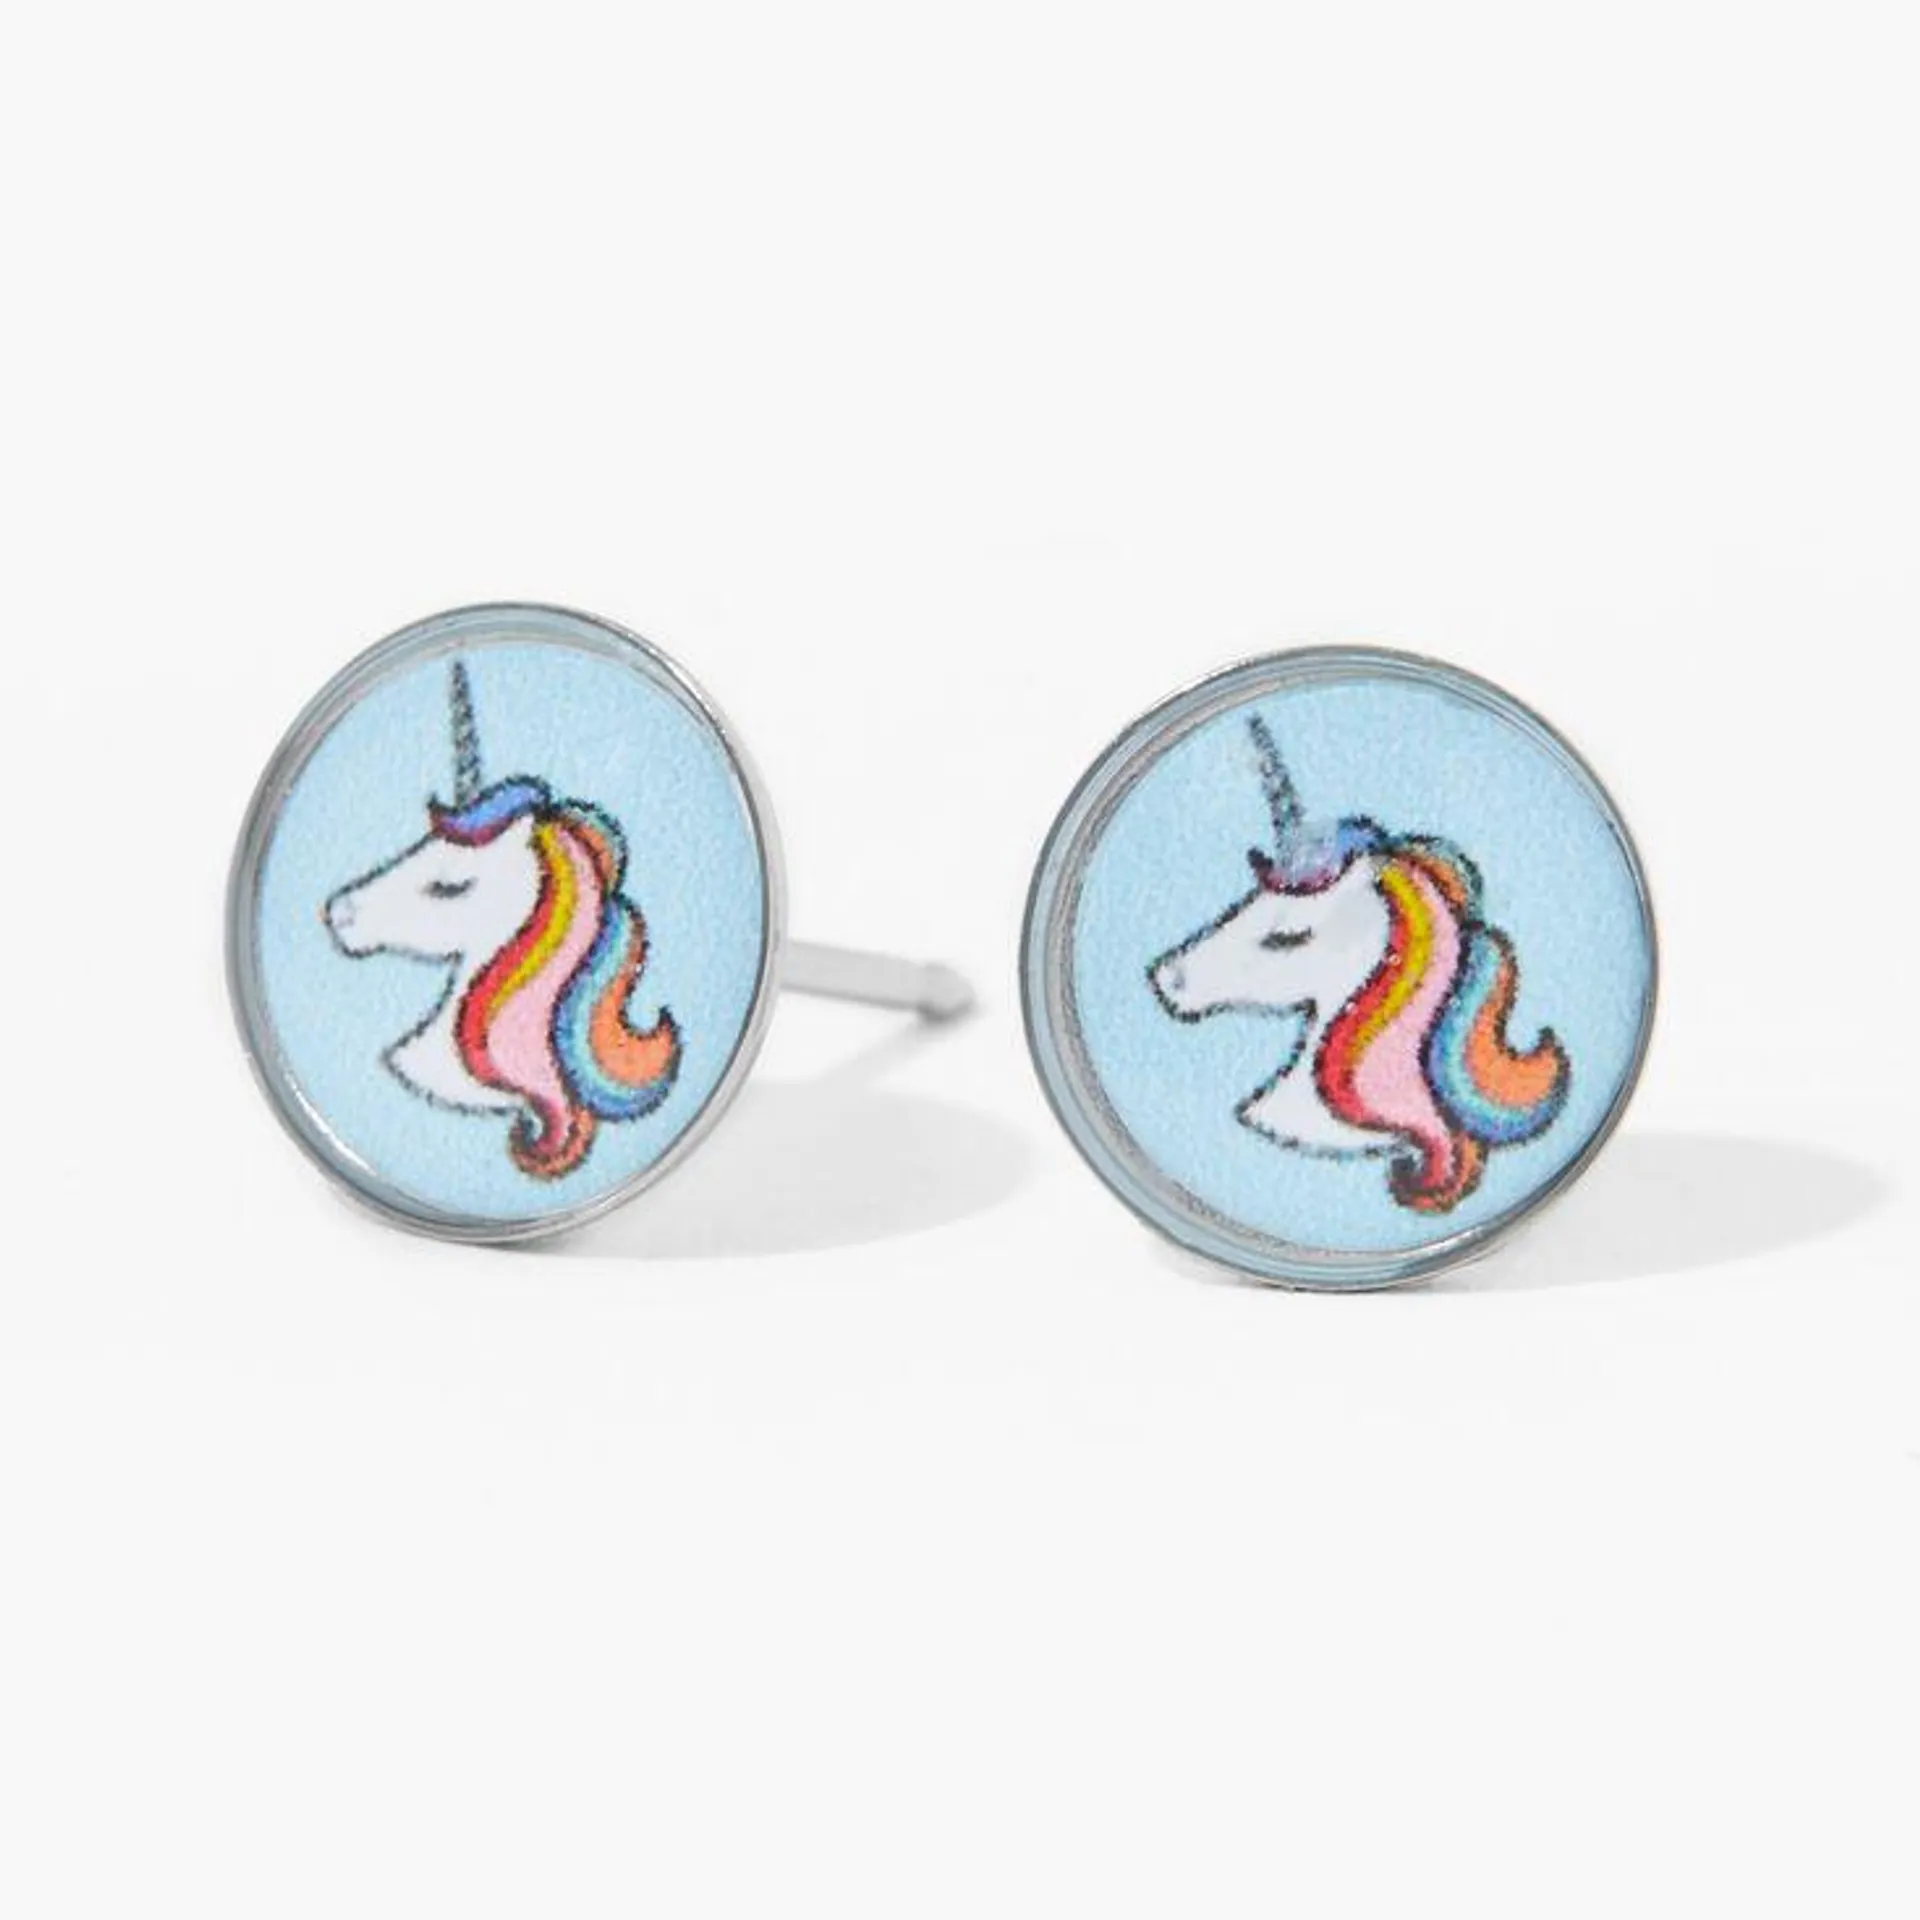 Claire's Exclusive Unicorn Studs with Stainless Steel Posts Ear Piercing Kit with Ear Care Solution